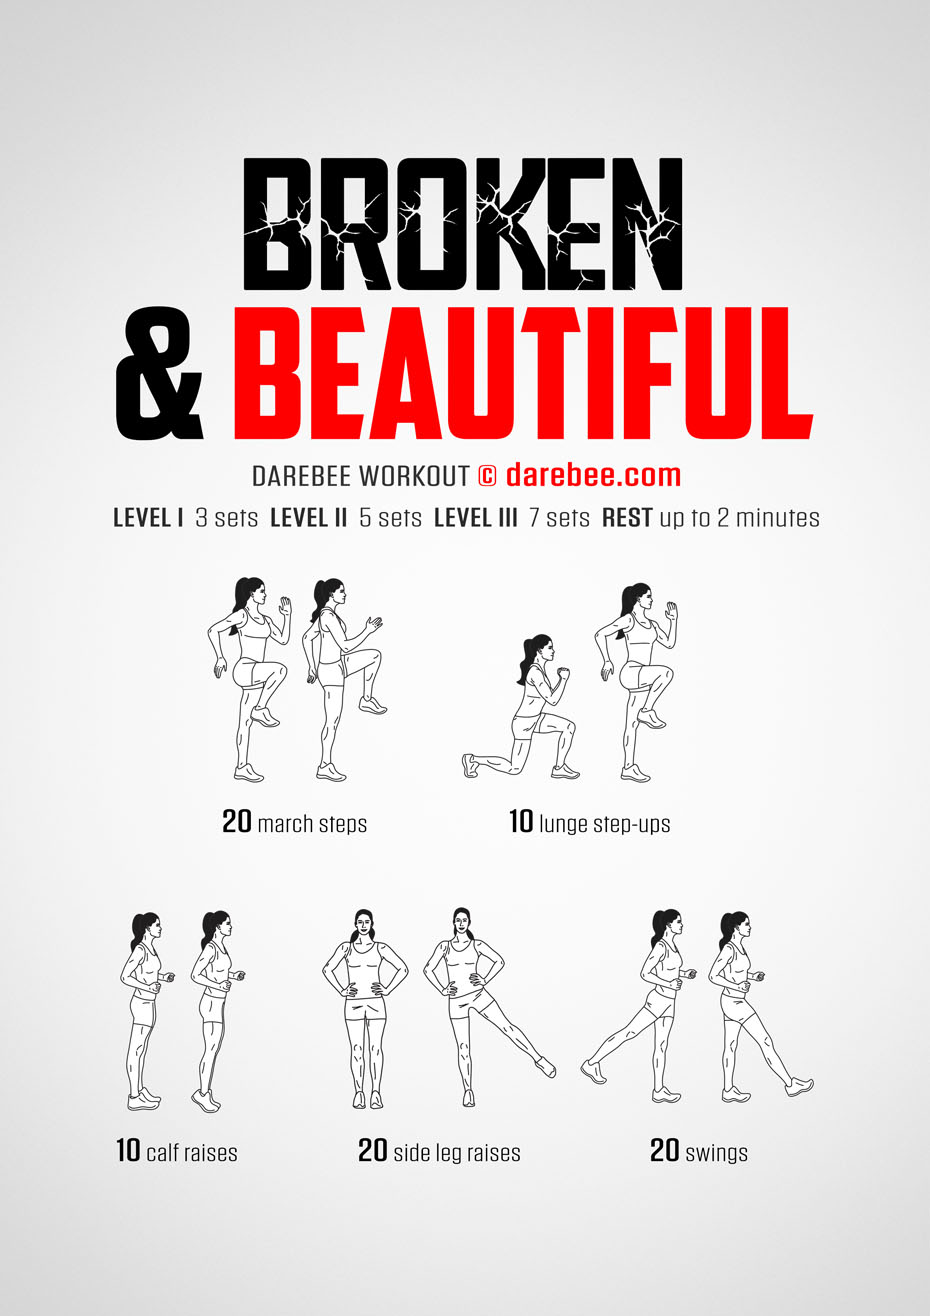 Broken & Beautiful is a Darebee home-fitness workout that helps you develop great lower body strength and control. 